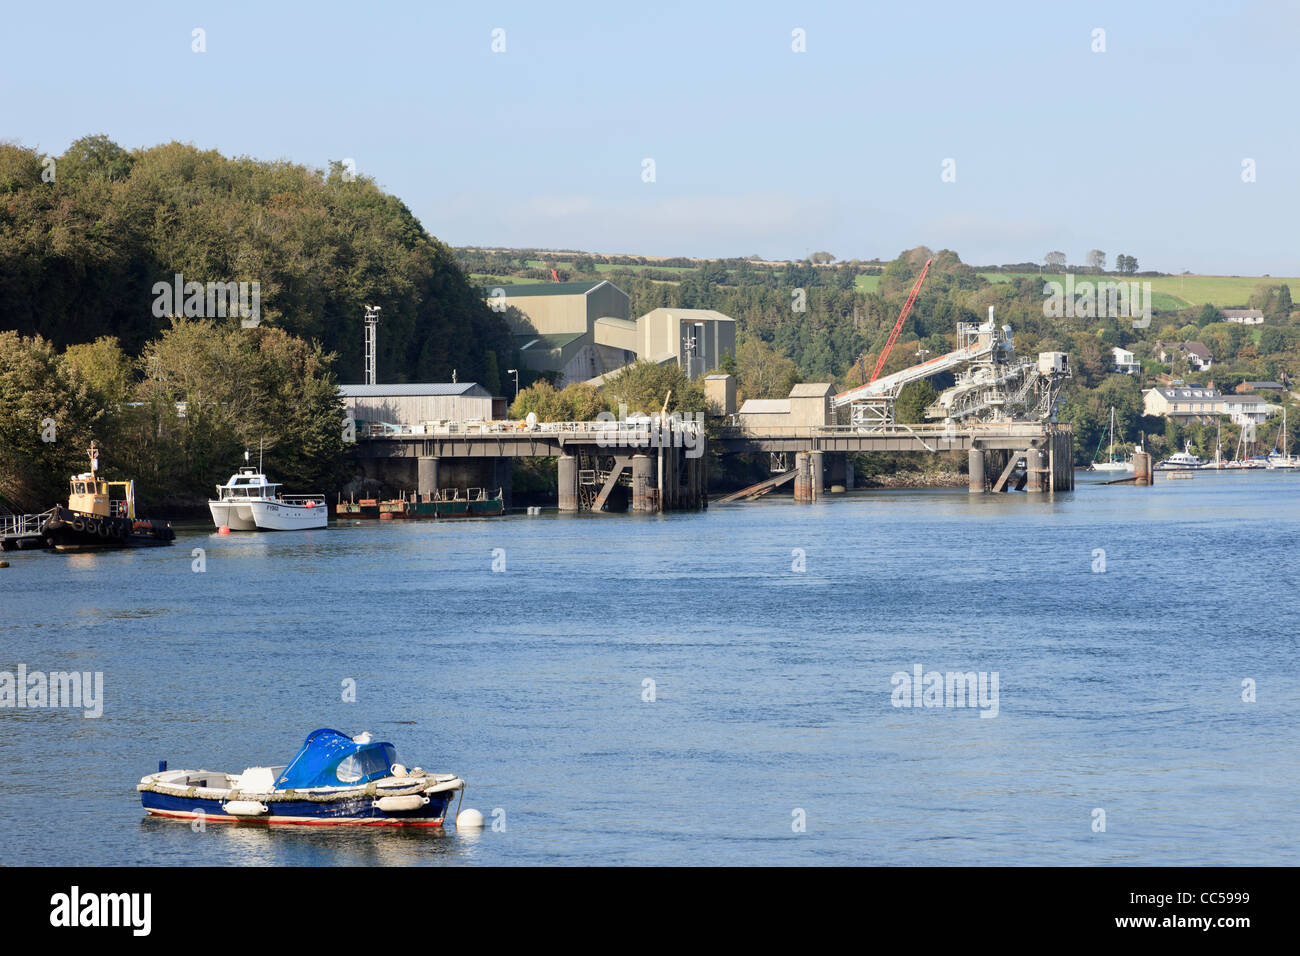 China clay jetties in the port on the Fowey River. Fowey, Cornwall, England, UK, Britain. Stock Photo